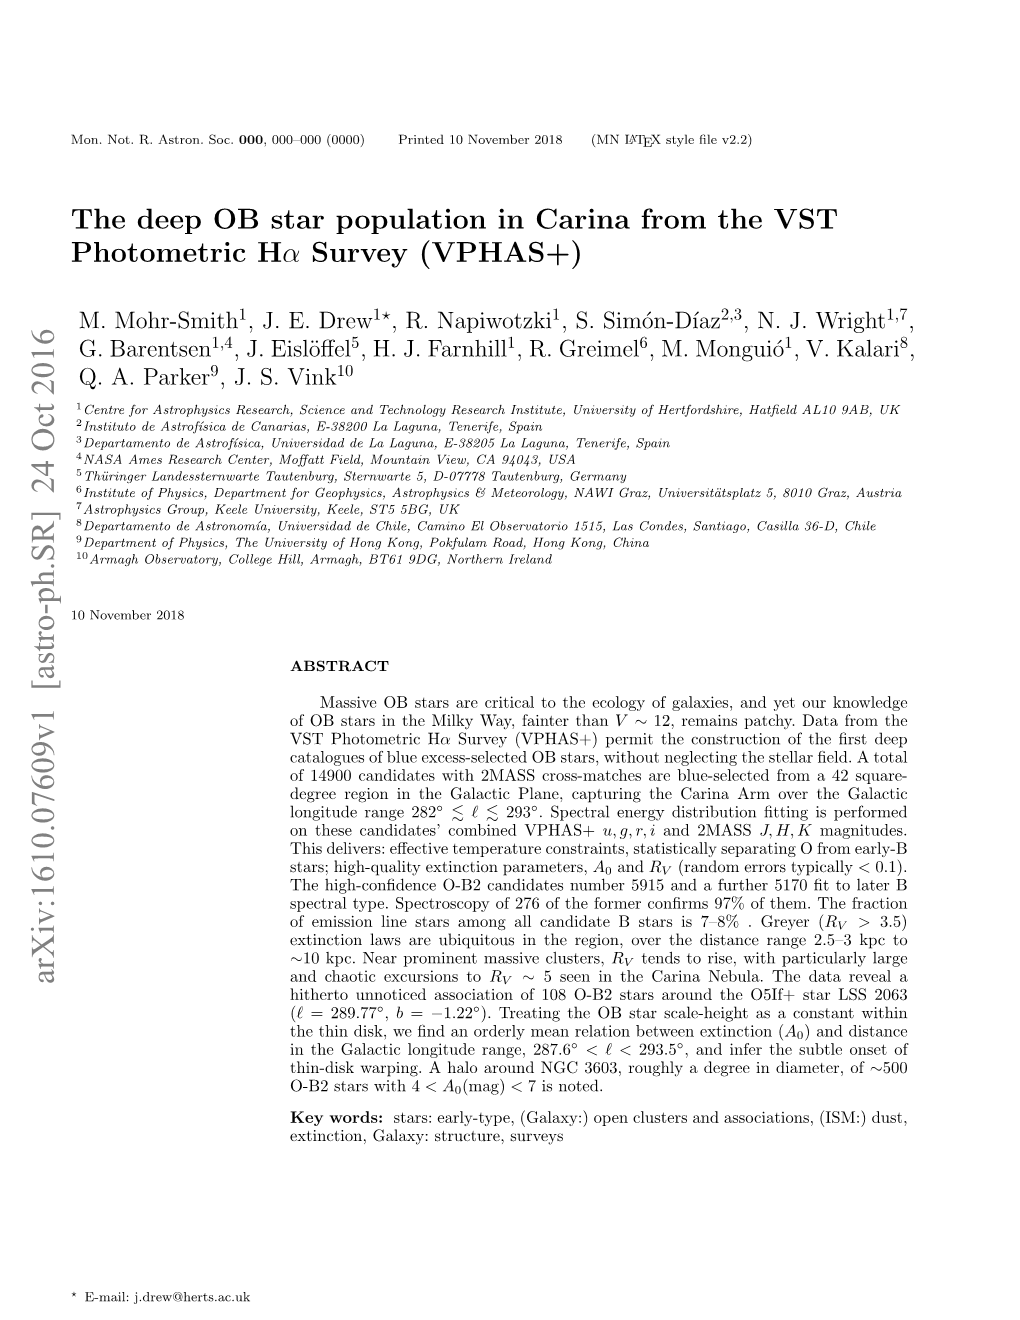 The Deep OB Star Population in Carina from the VST Photometric Hα Survey (VPHAS+)